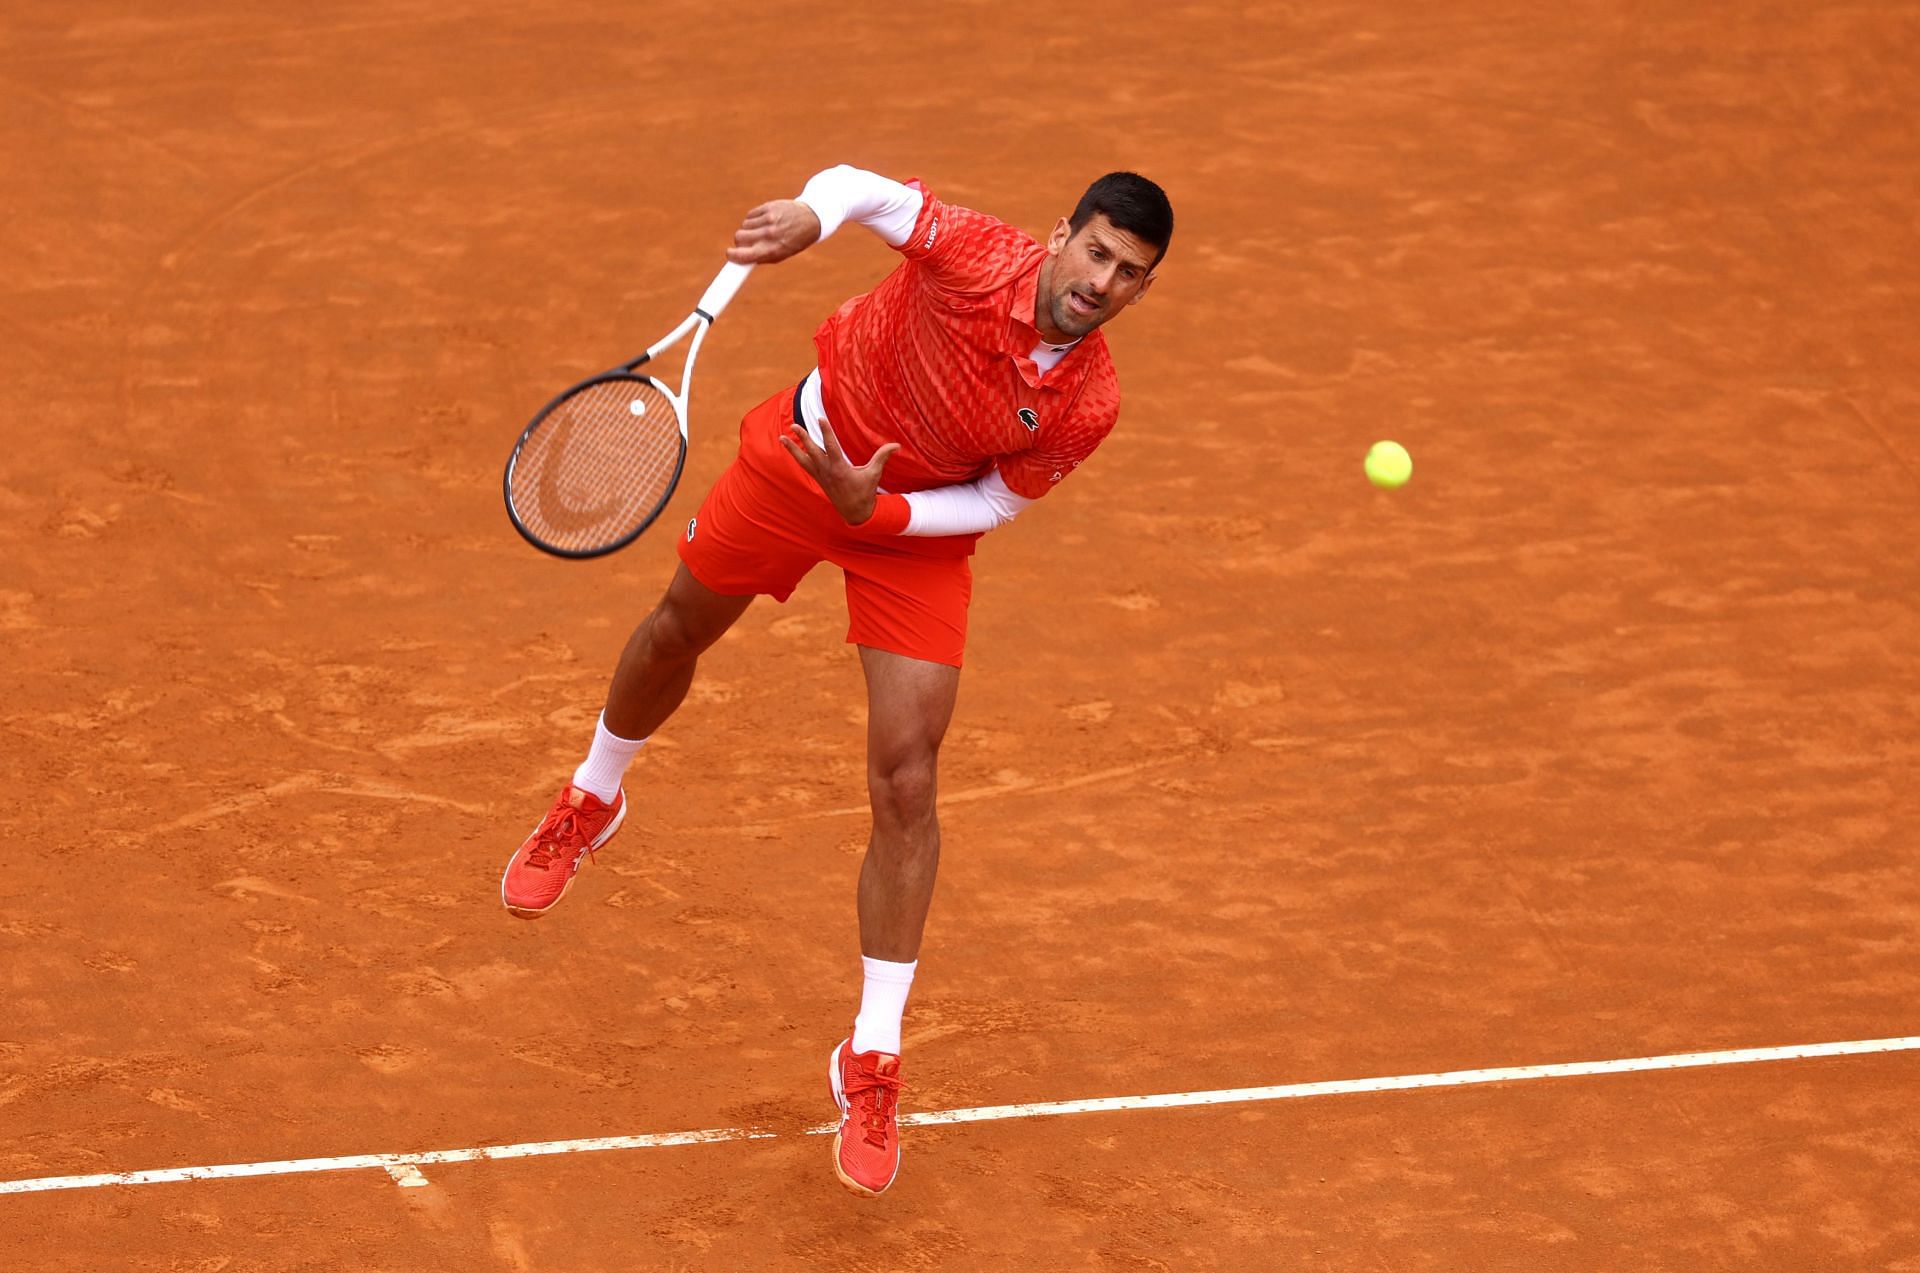 Djokovic is looking to create history at Roland Garros this year.